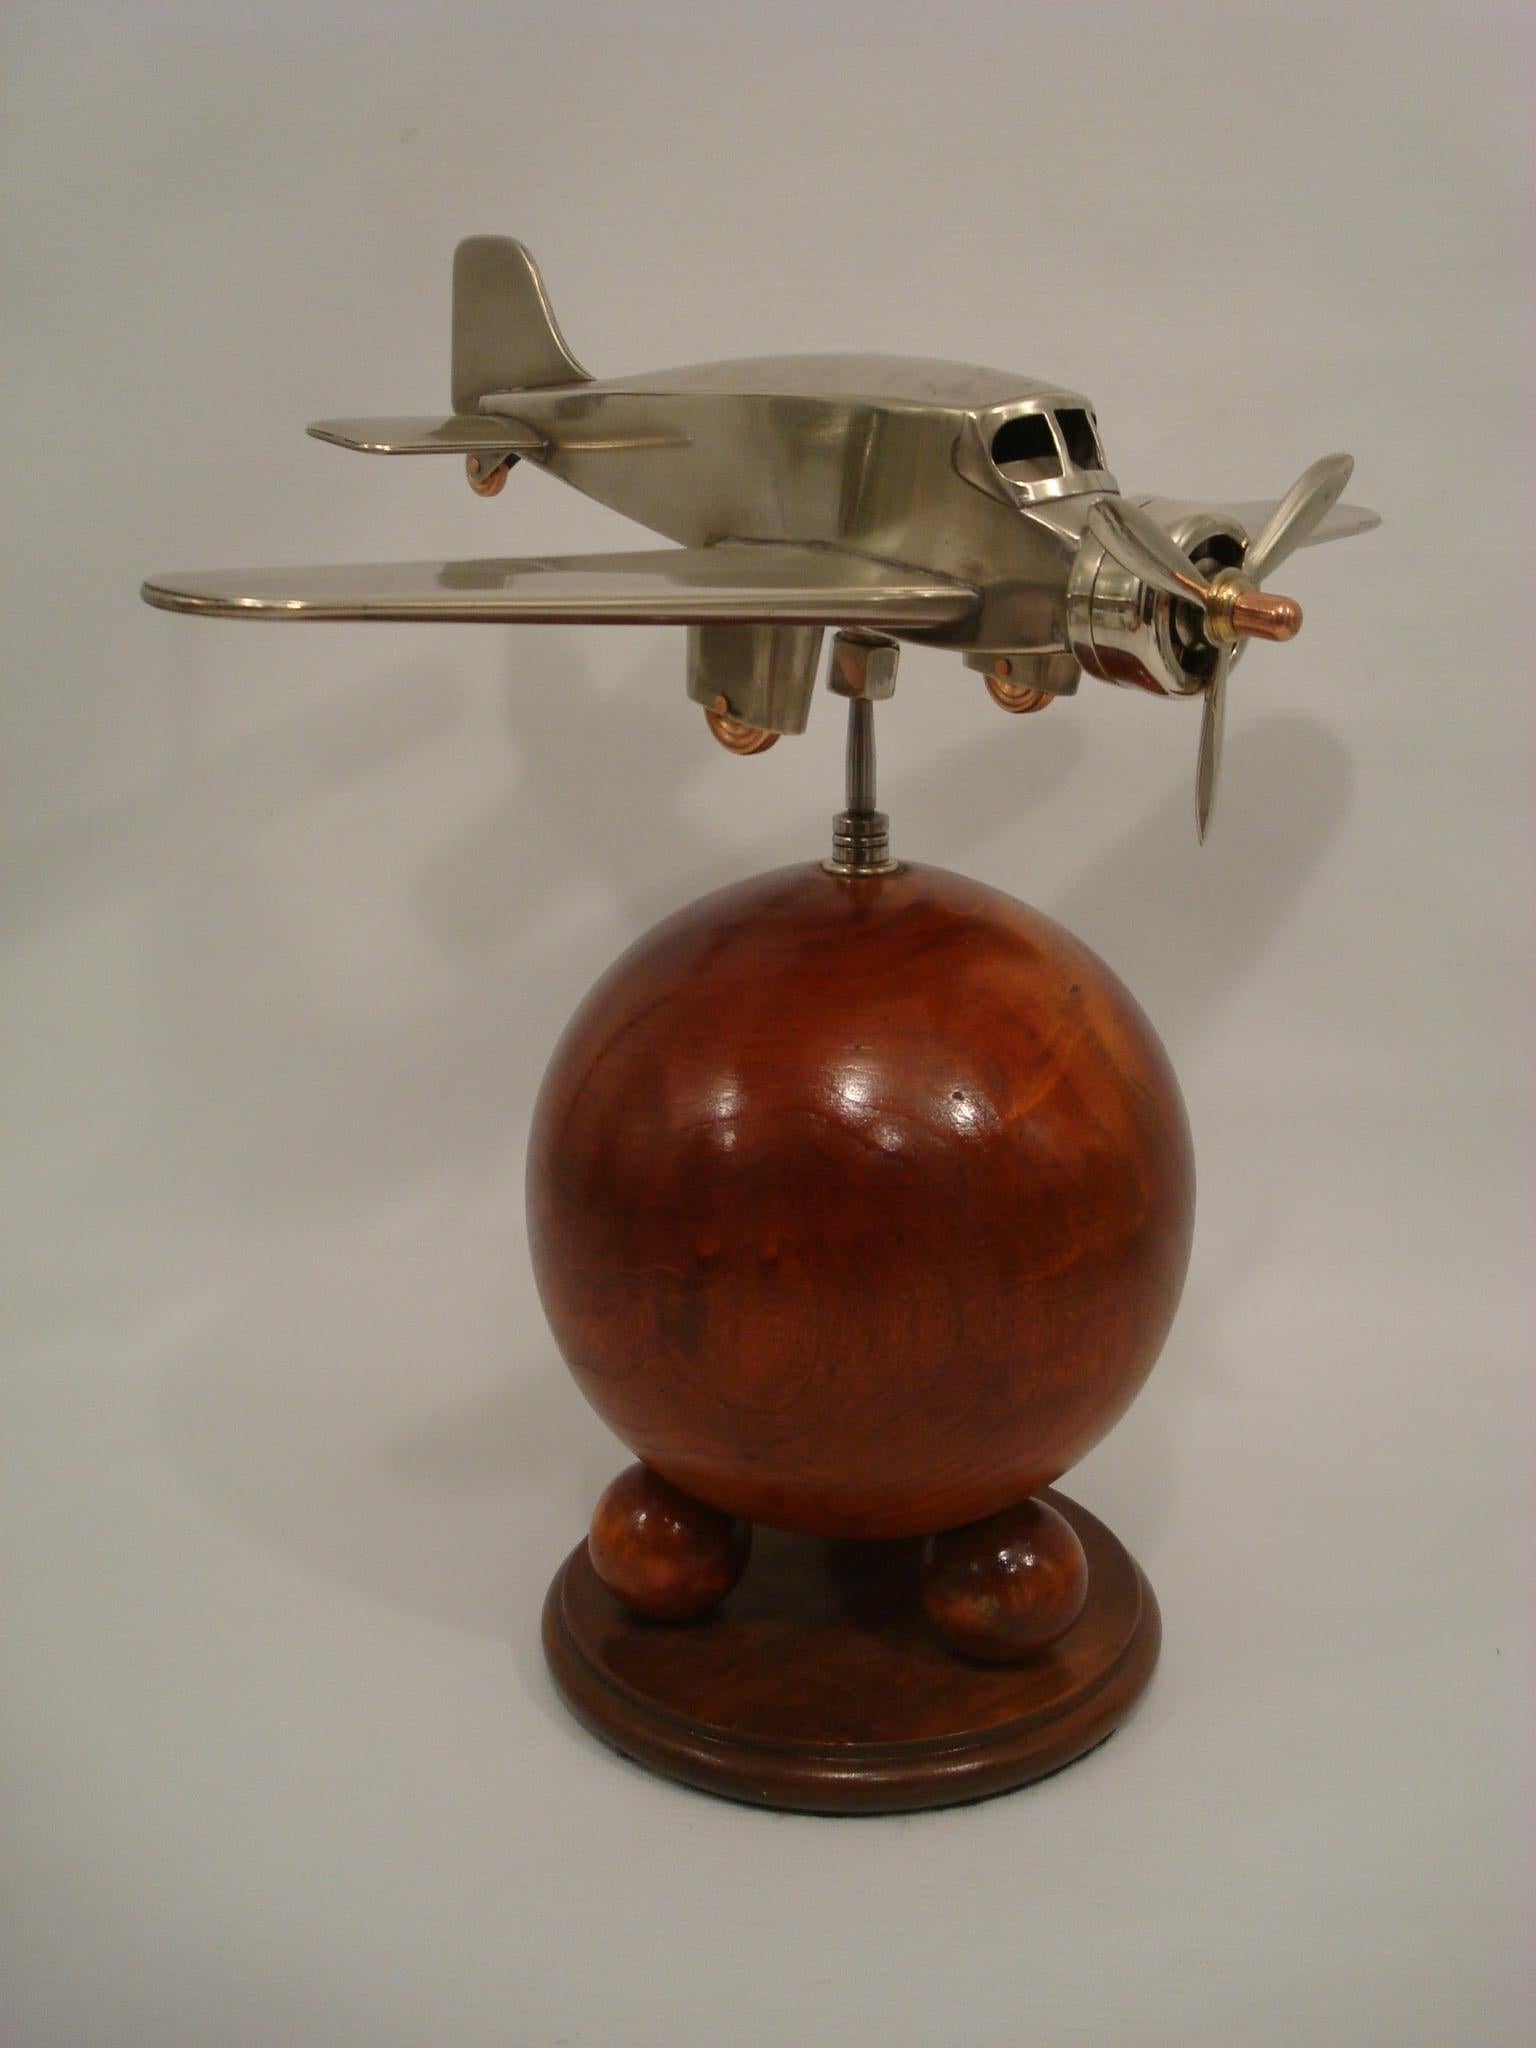 Art Deco Brass Airplane desk Model, 1930´s.
Lovely Aviation Desk model, made in United Kingdom 1930´s.
Excellent restored conditions. The airplane can be adjust to any position and the propeller spins.
Fantastic gift